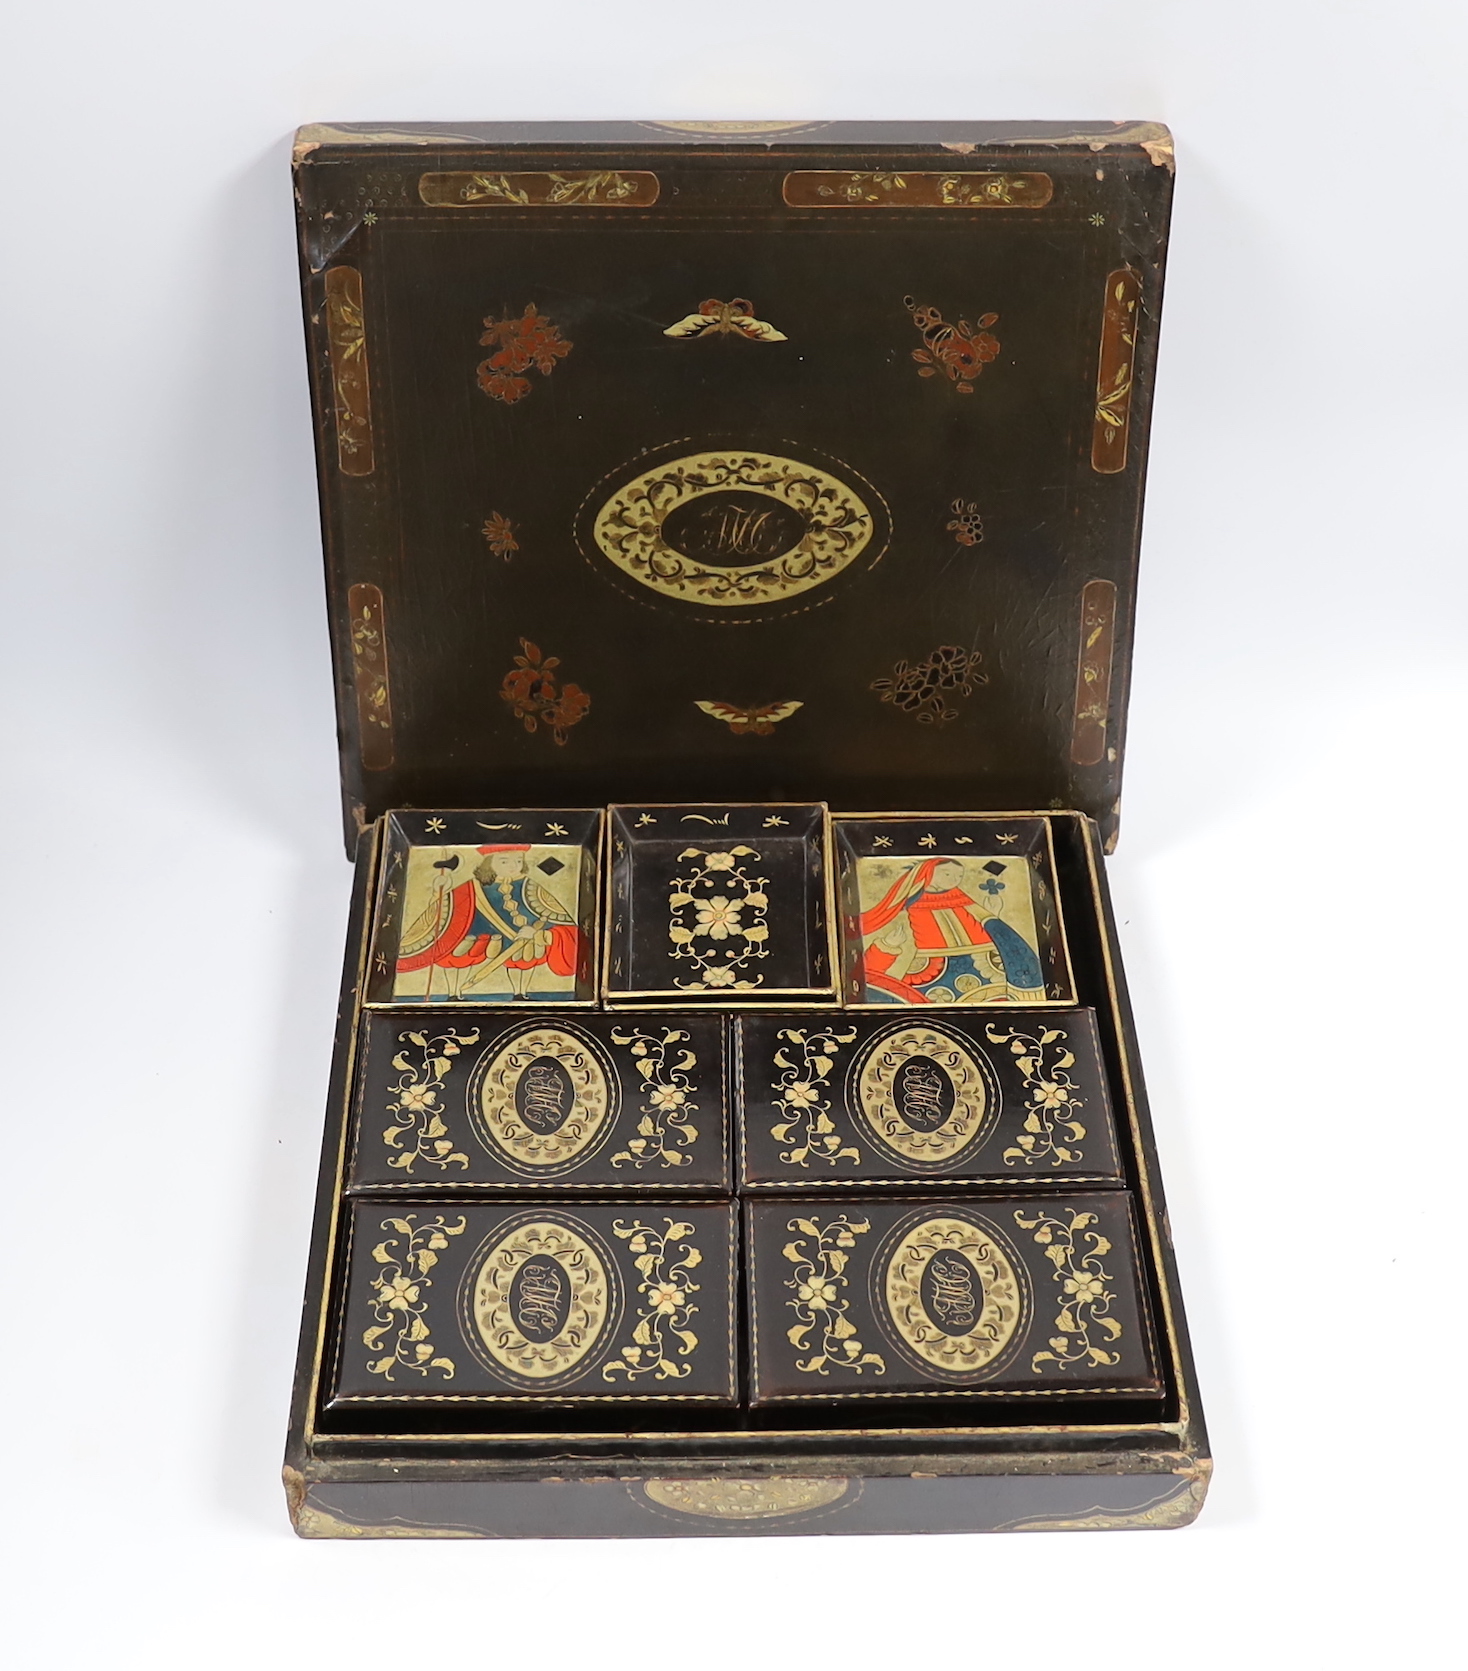 A mid 19th century Chinese export lacquer games box, containing mother of pearl counters